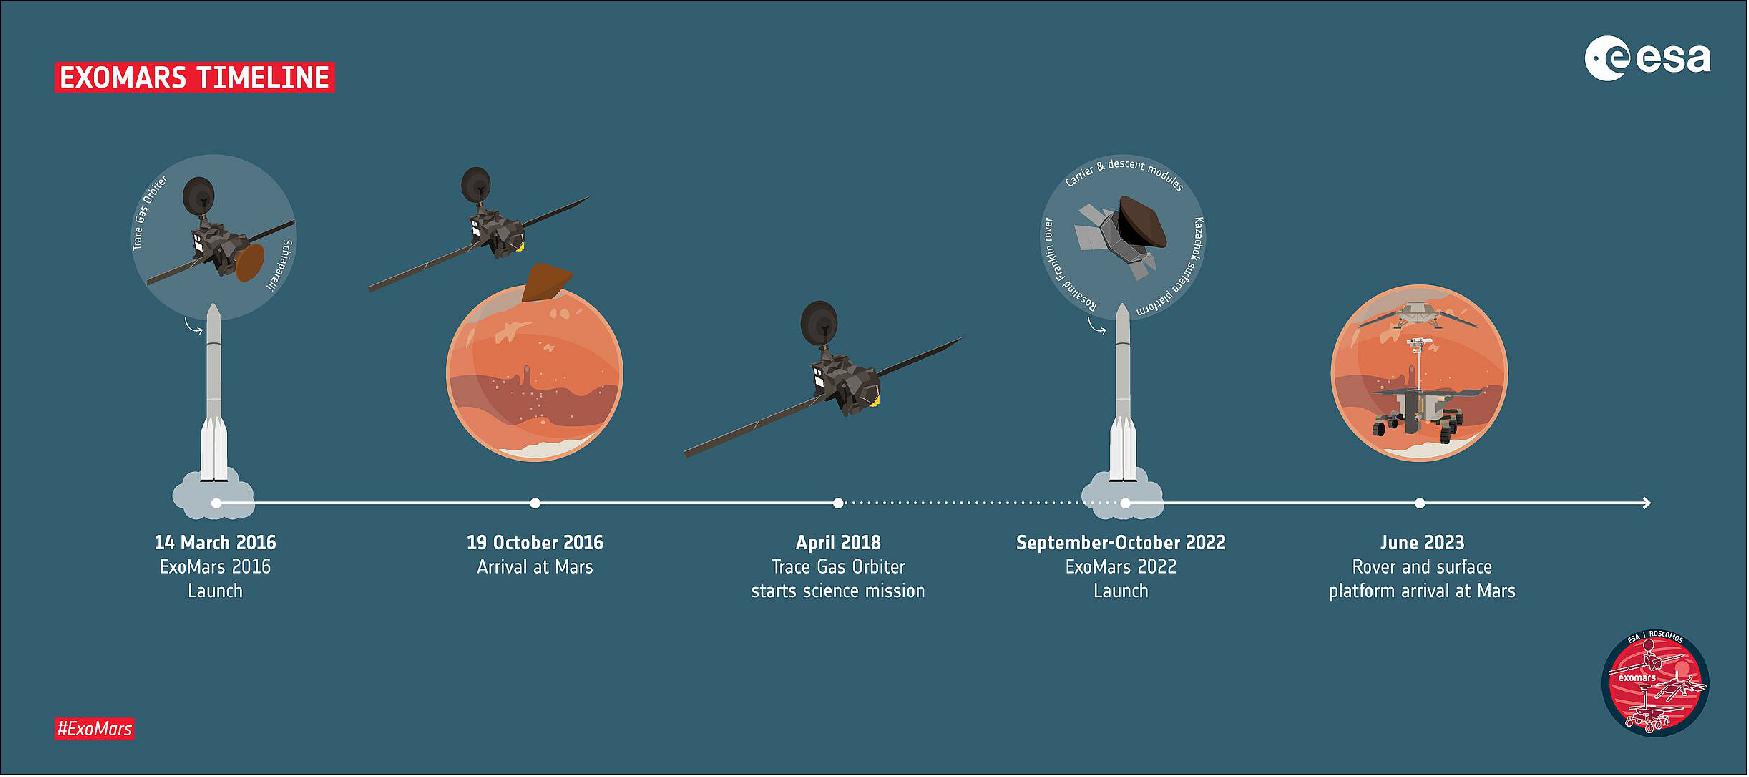 Figure 11: Overview of the ExoMars program timeline. The ExoMars program is a joint endeavor between Roscosmos State Corporation and ESA. Apart from the 2022 mission, it includes the Trace Gas Orbiter (TGO) launched in 2016. The TGO is already both delivering important scientific results obtained by its own Russian and European science instruments and relaying data from NASA’s Curiosity Mars rover and InSight lander. The module will also relay the data from the ExoMars 2022 mission once it arrives at Mars (image credit: ESA)